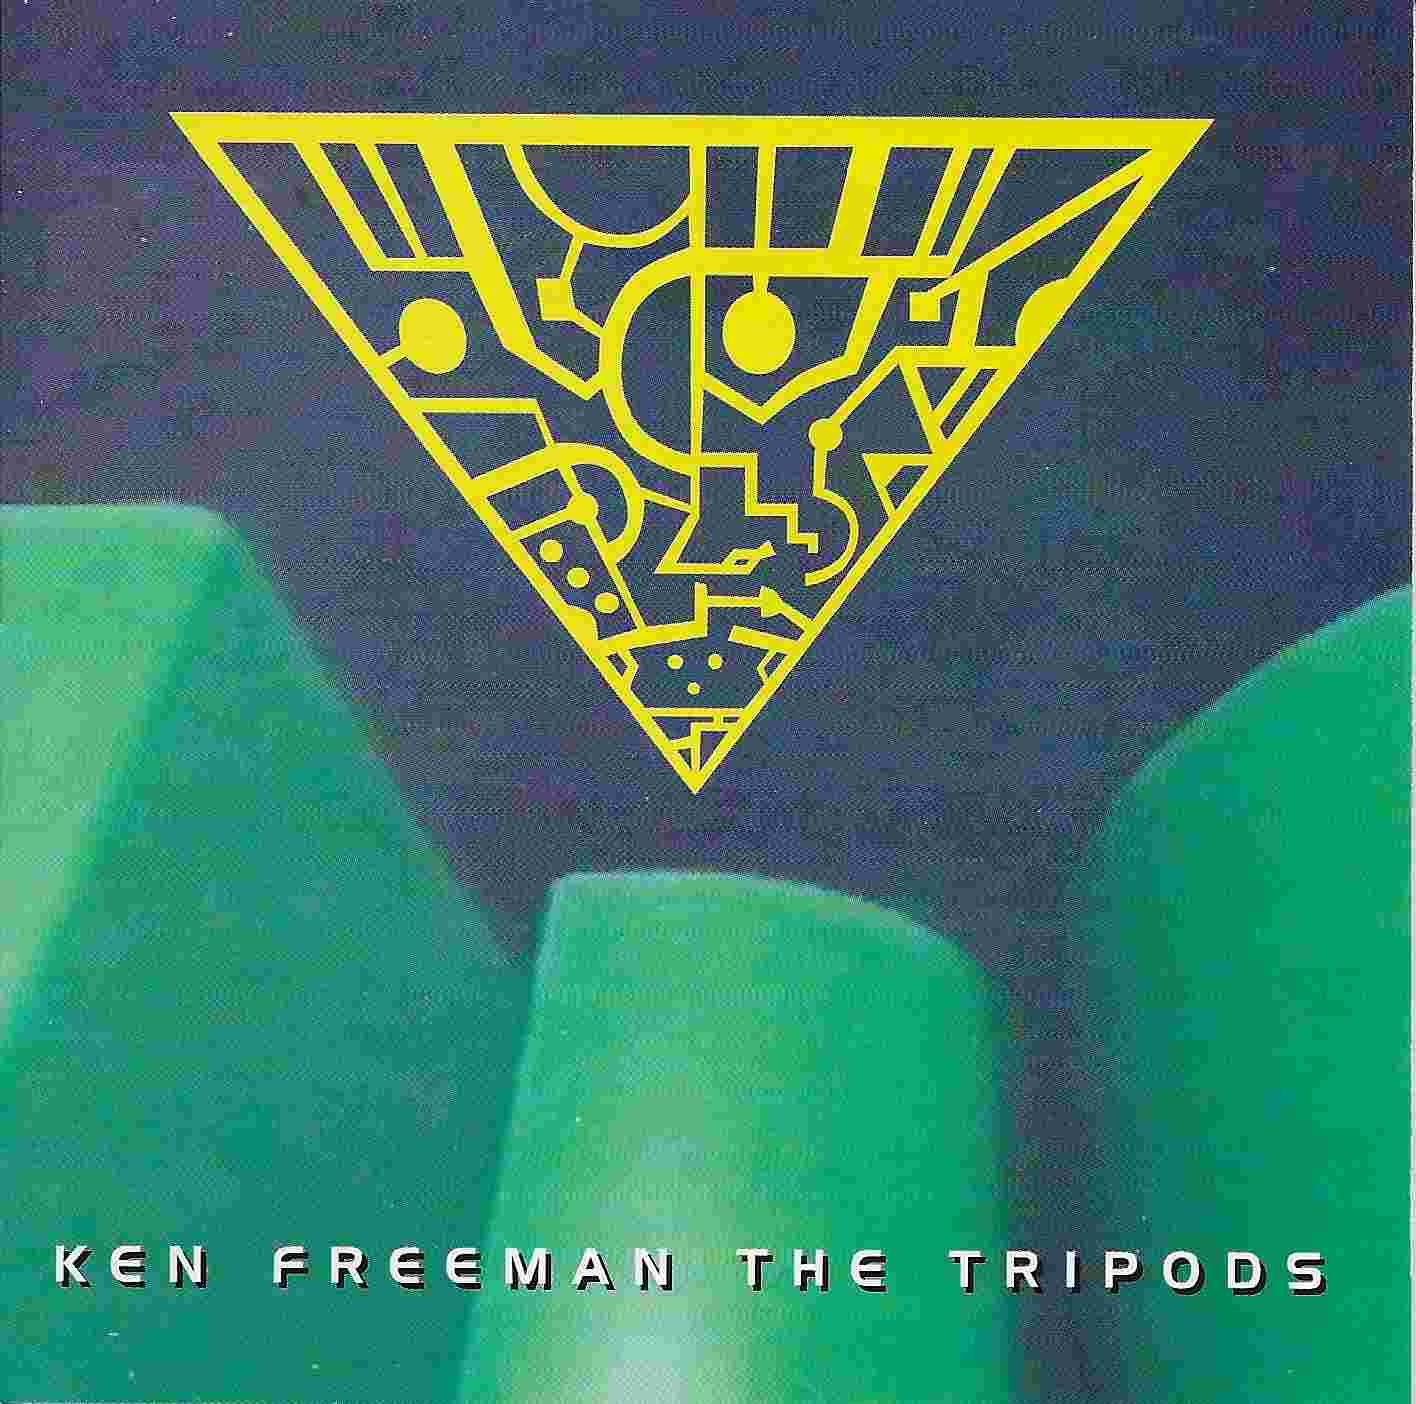 Picture of GERCD 1 The tripods by artist Ken Freeman from the BBC cds - Records and Tapes library